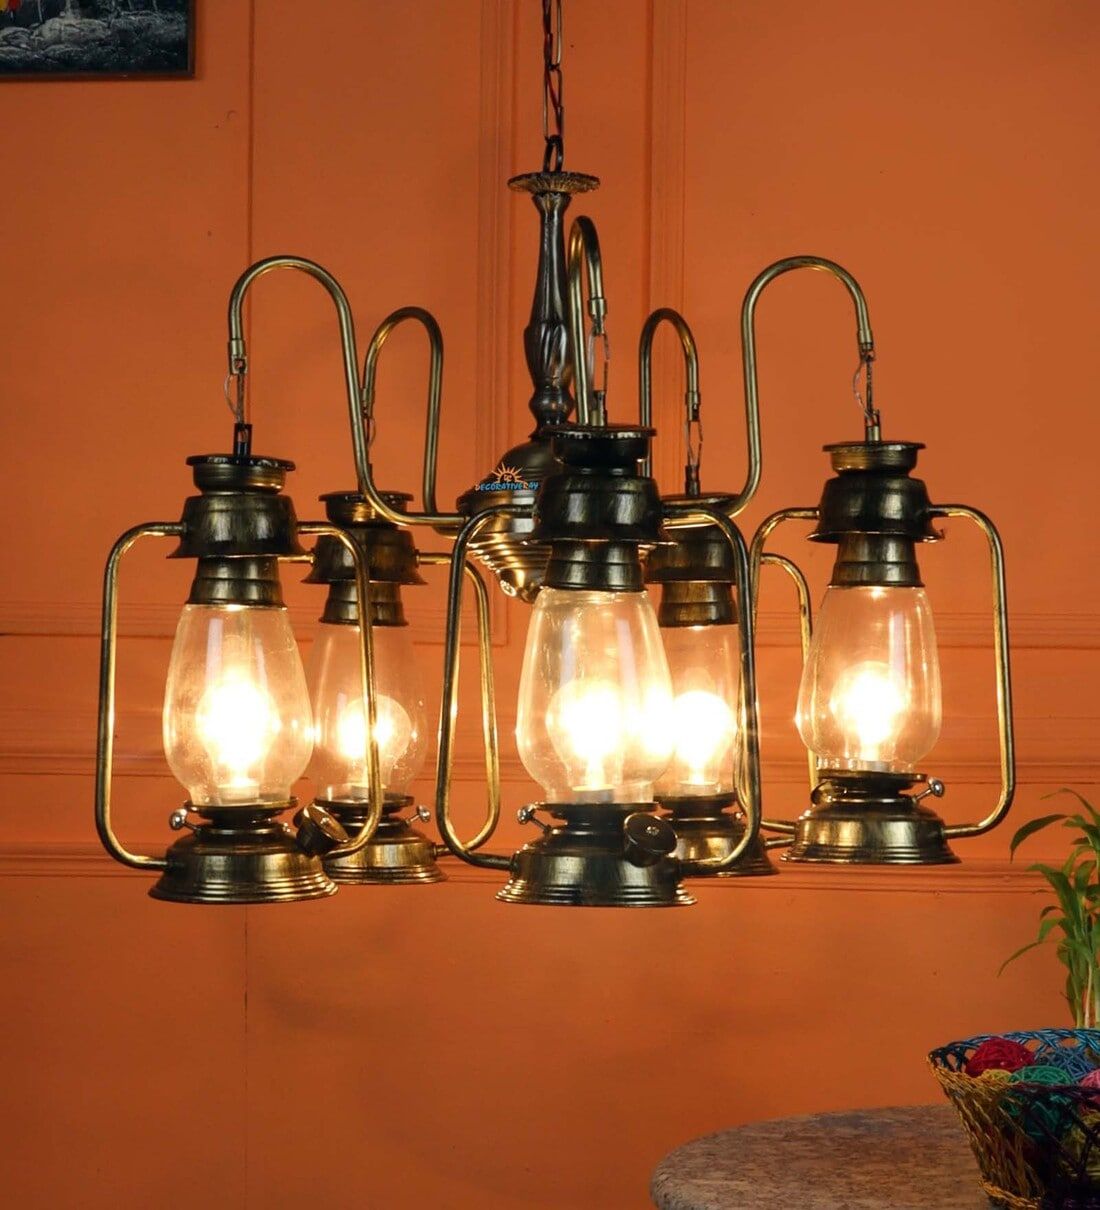 Buy Antique Lantern Chandelier In Clear Glassdecorativeray Online –  Shaded Chandeliers – Chandeliers – Lamps And Lighting – Pepperfry Product Regarding Lantern Chandeliers With Clear Glass (View 7 of 15)